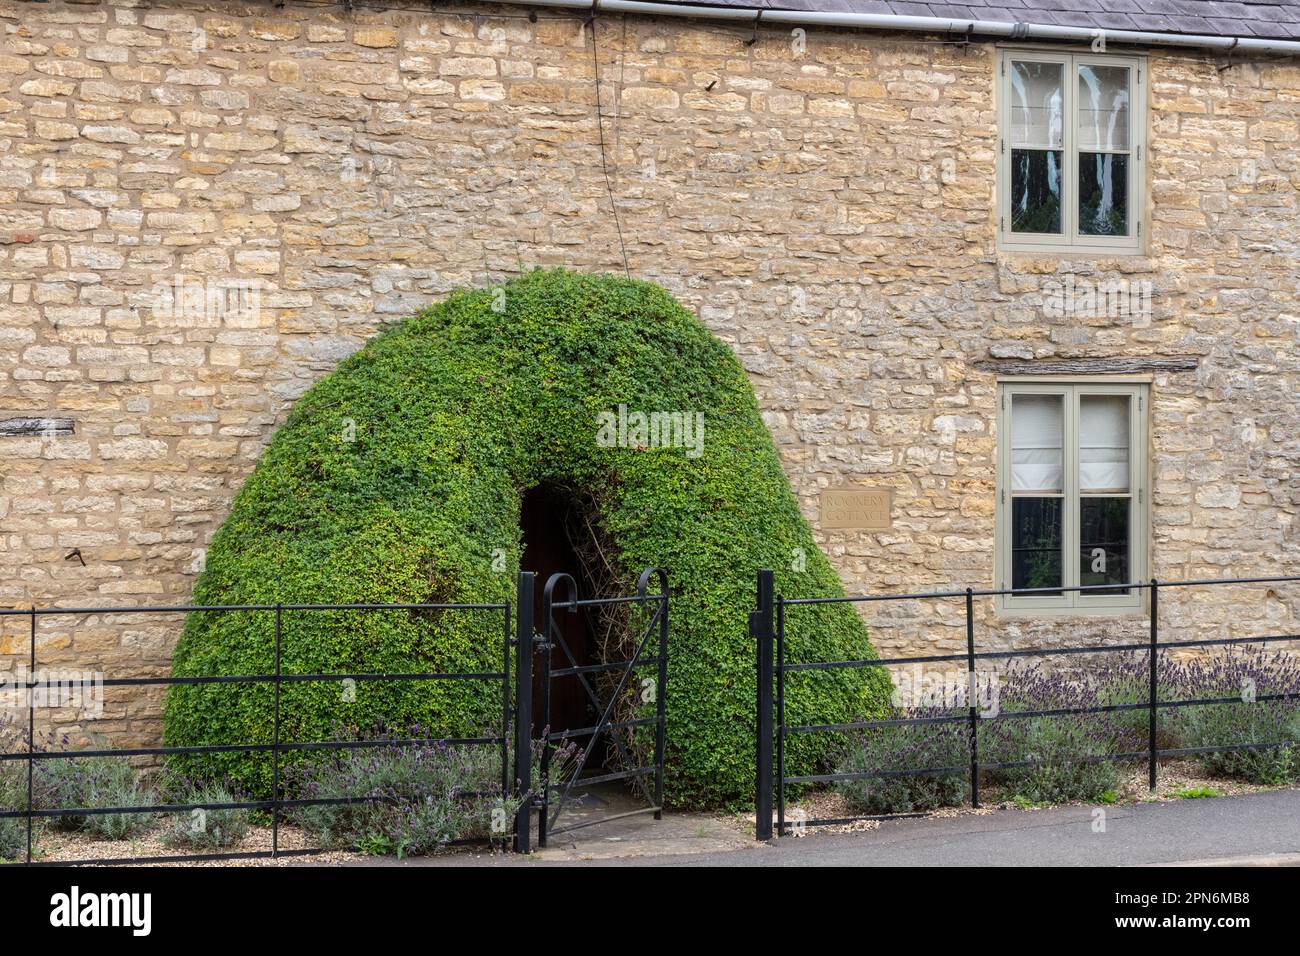 Stone built cottage with the entrance through a privet tunnel, Stoke Bruerne, Northamptonshire, England, UK Stock Photo